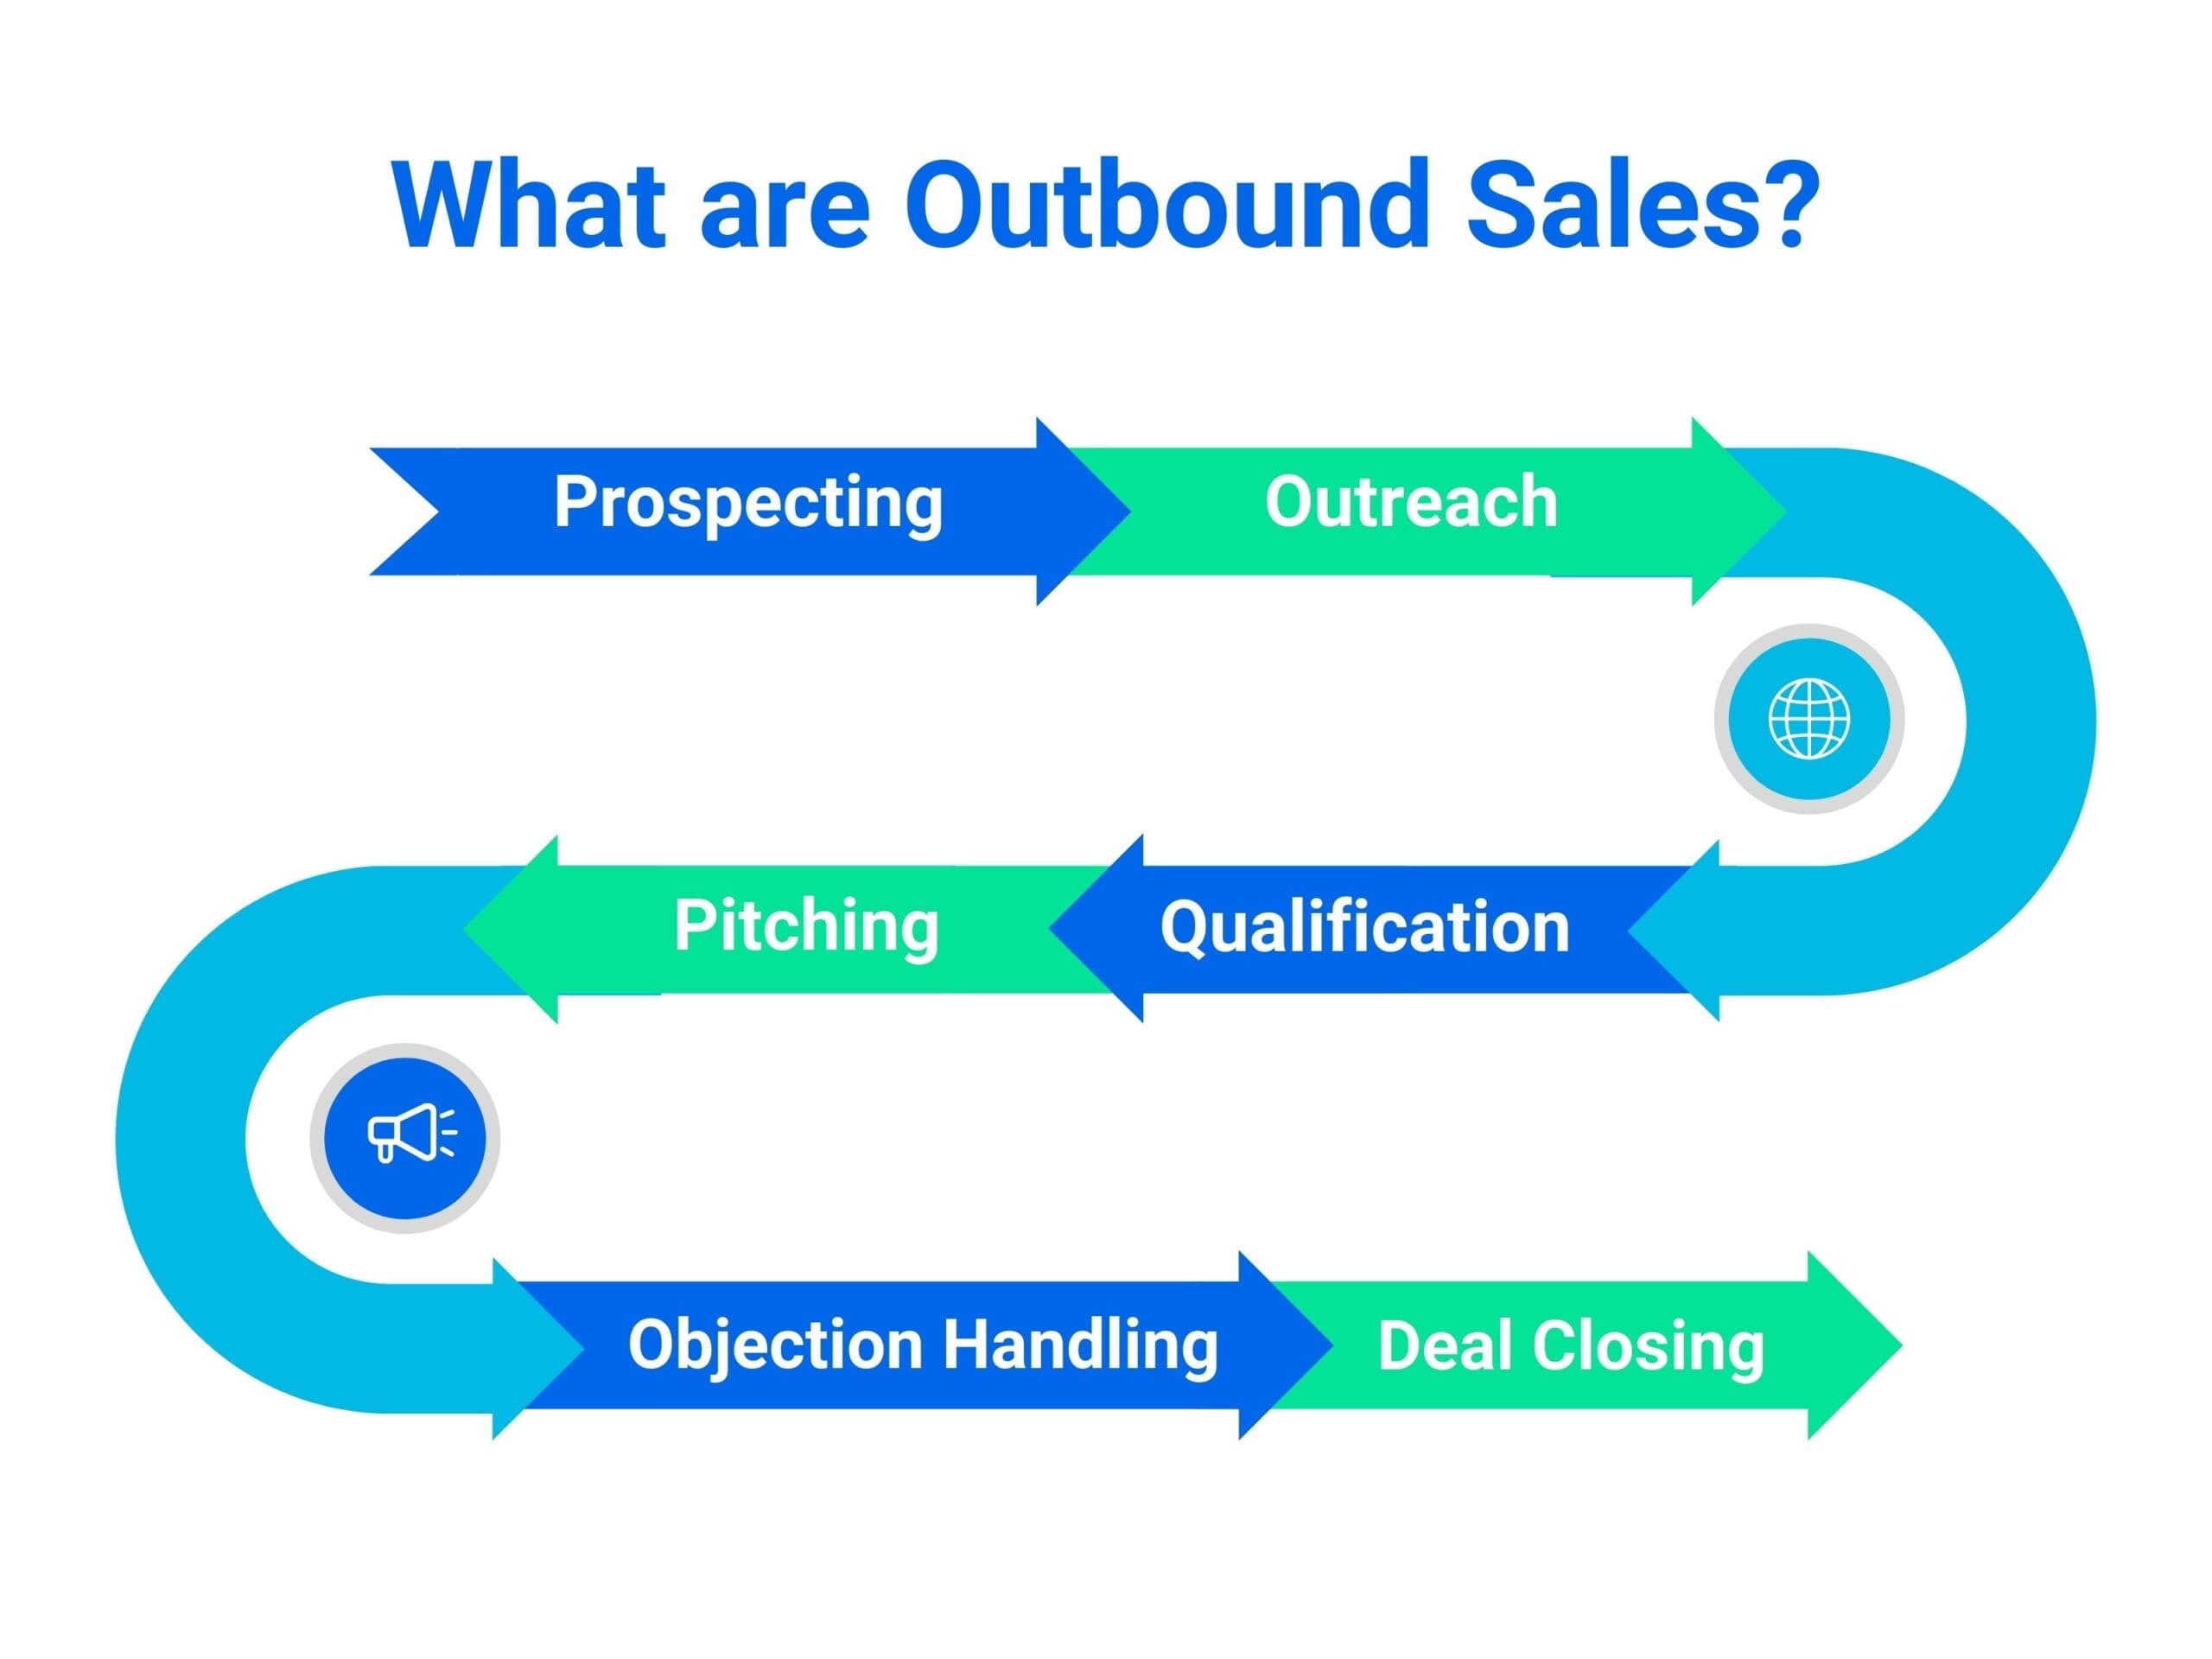 What are outbound sales?